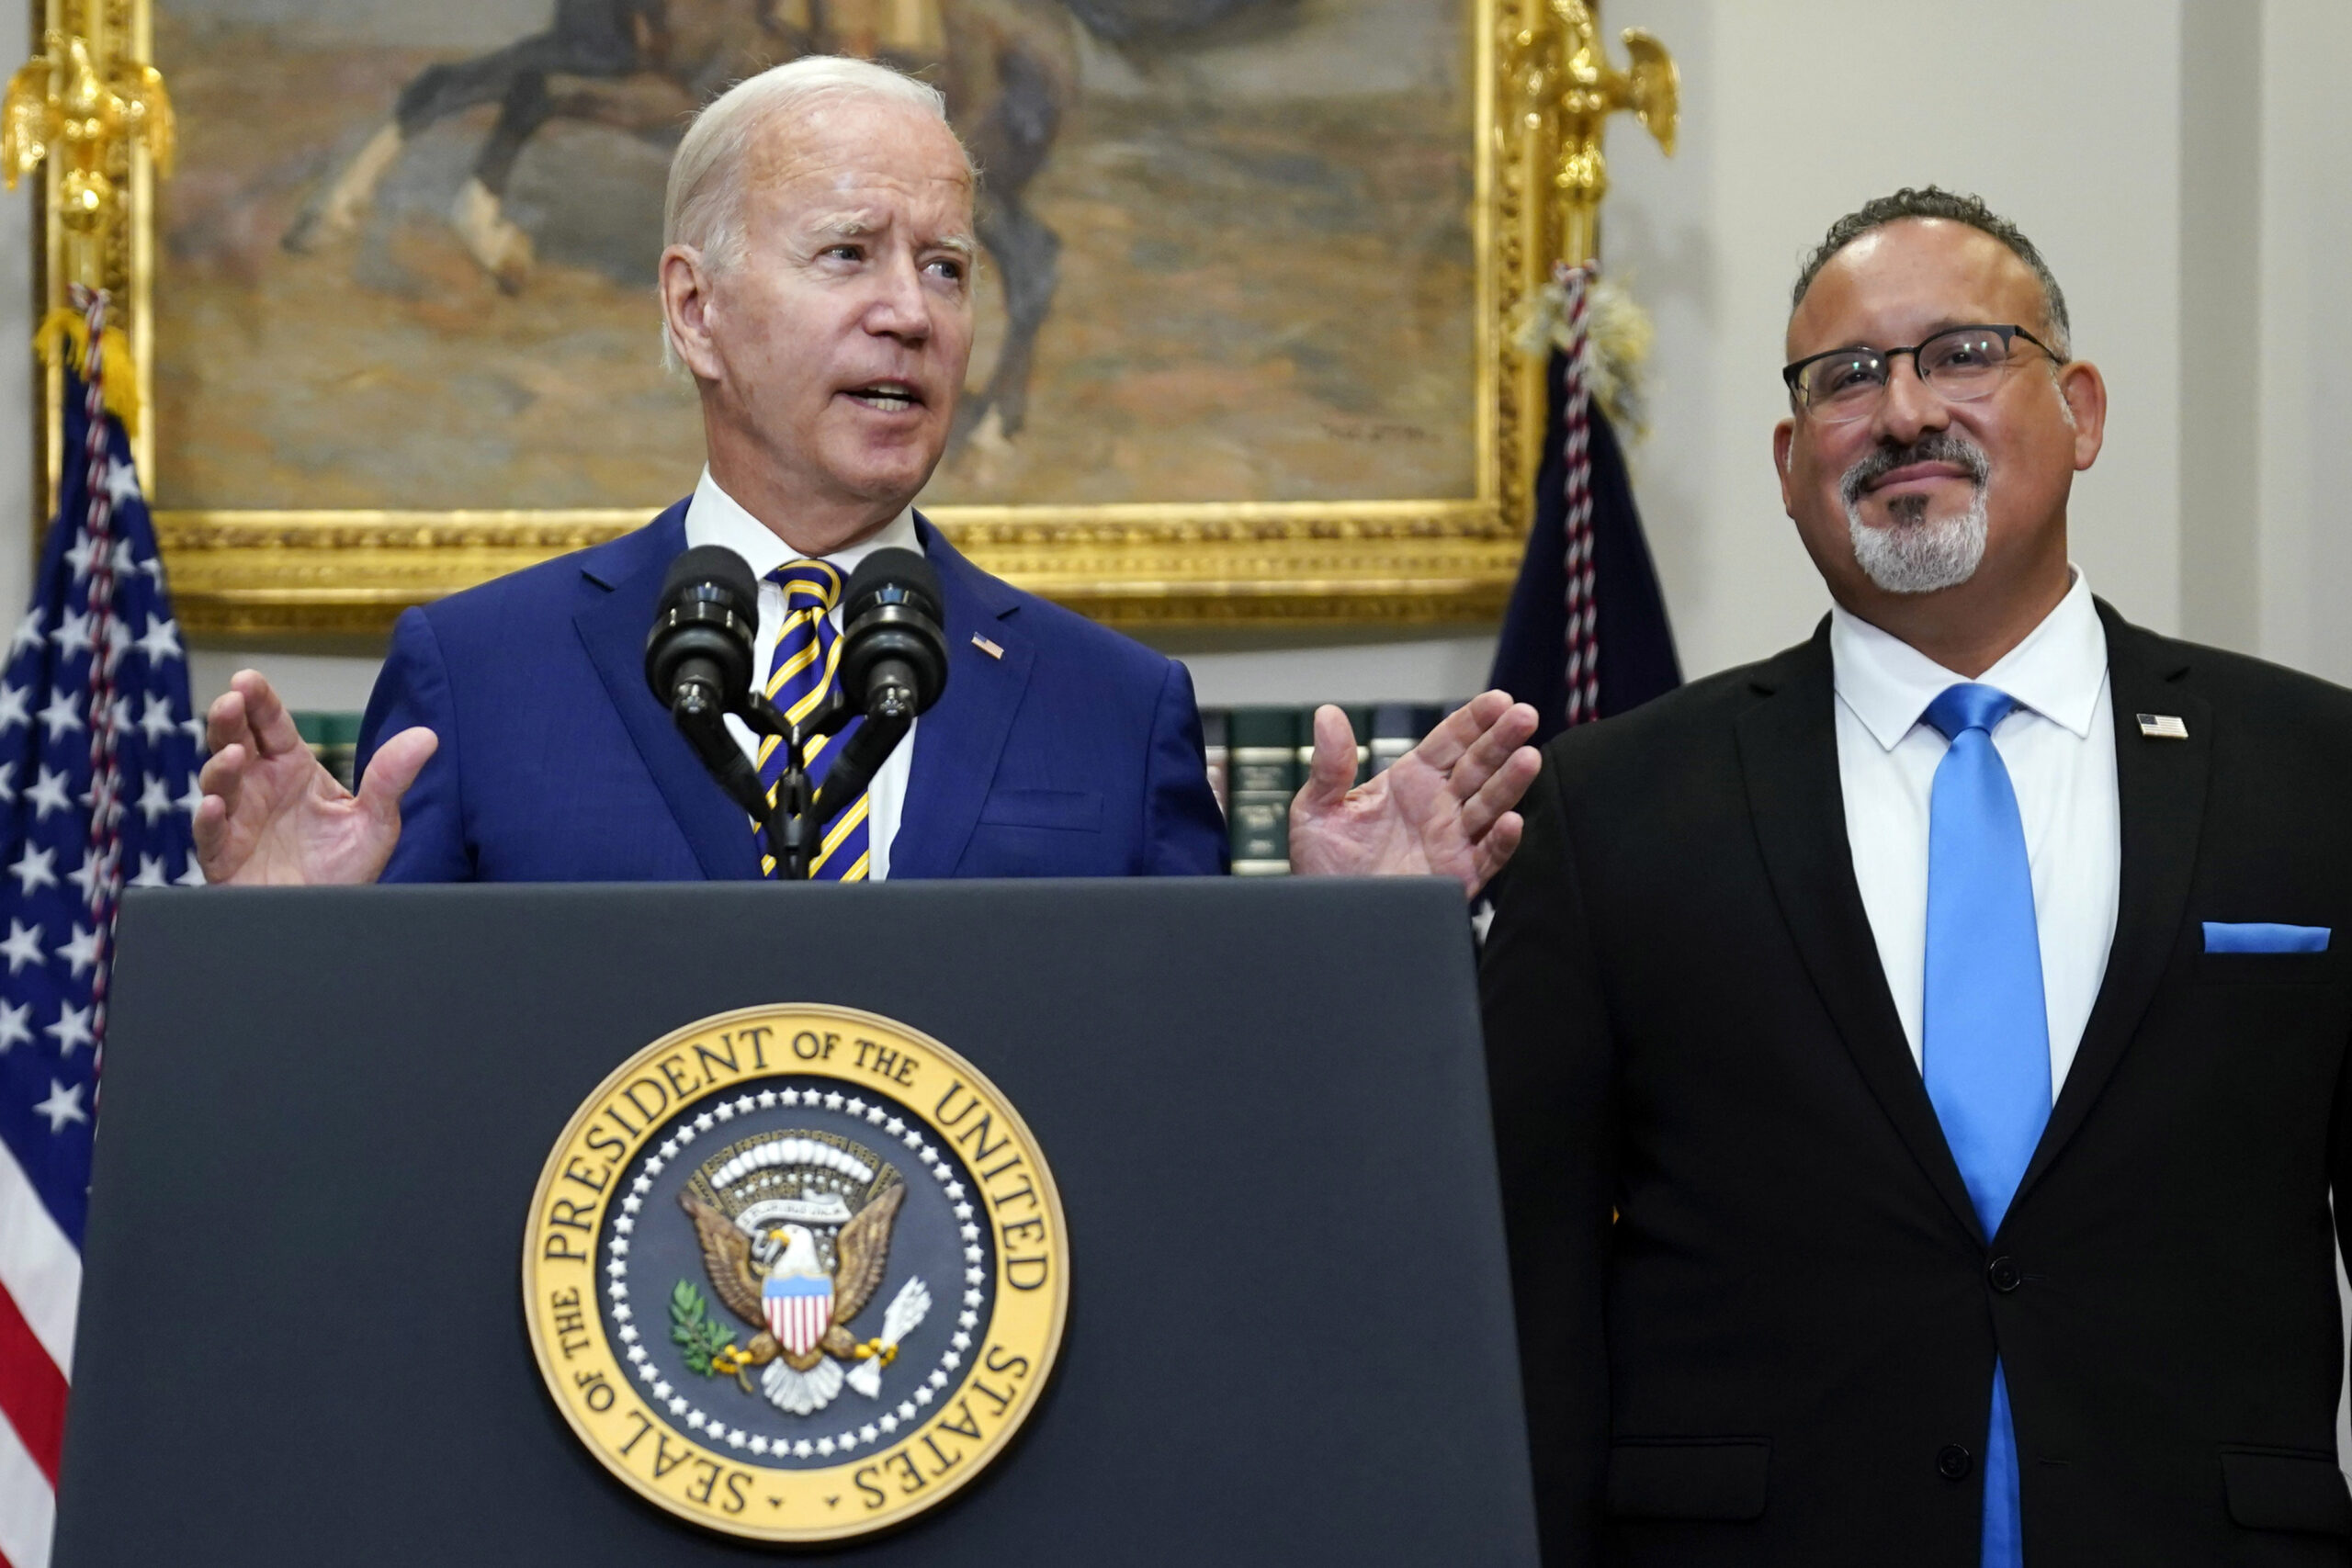 Conservative Wisconsin taxpayer group sues over Biden’s student loan forgiveness plan